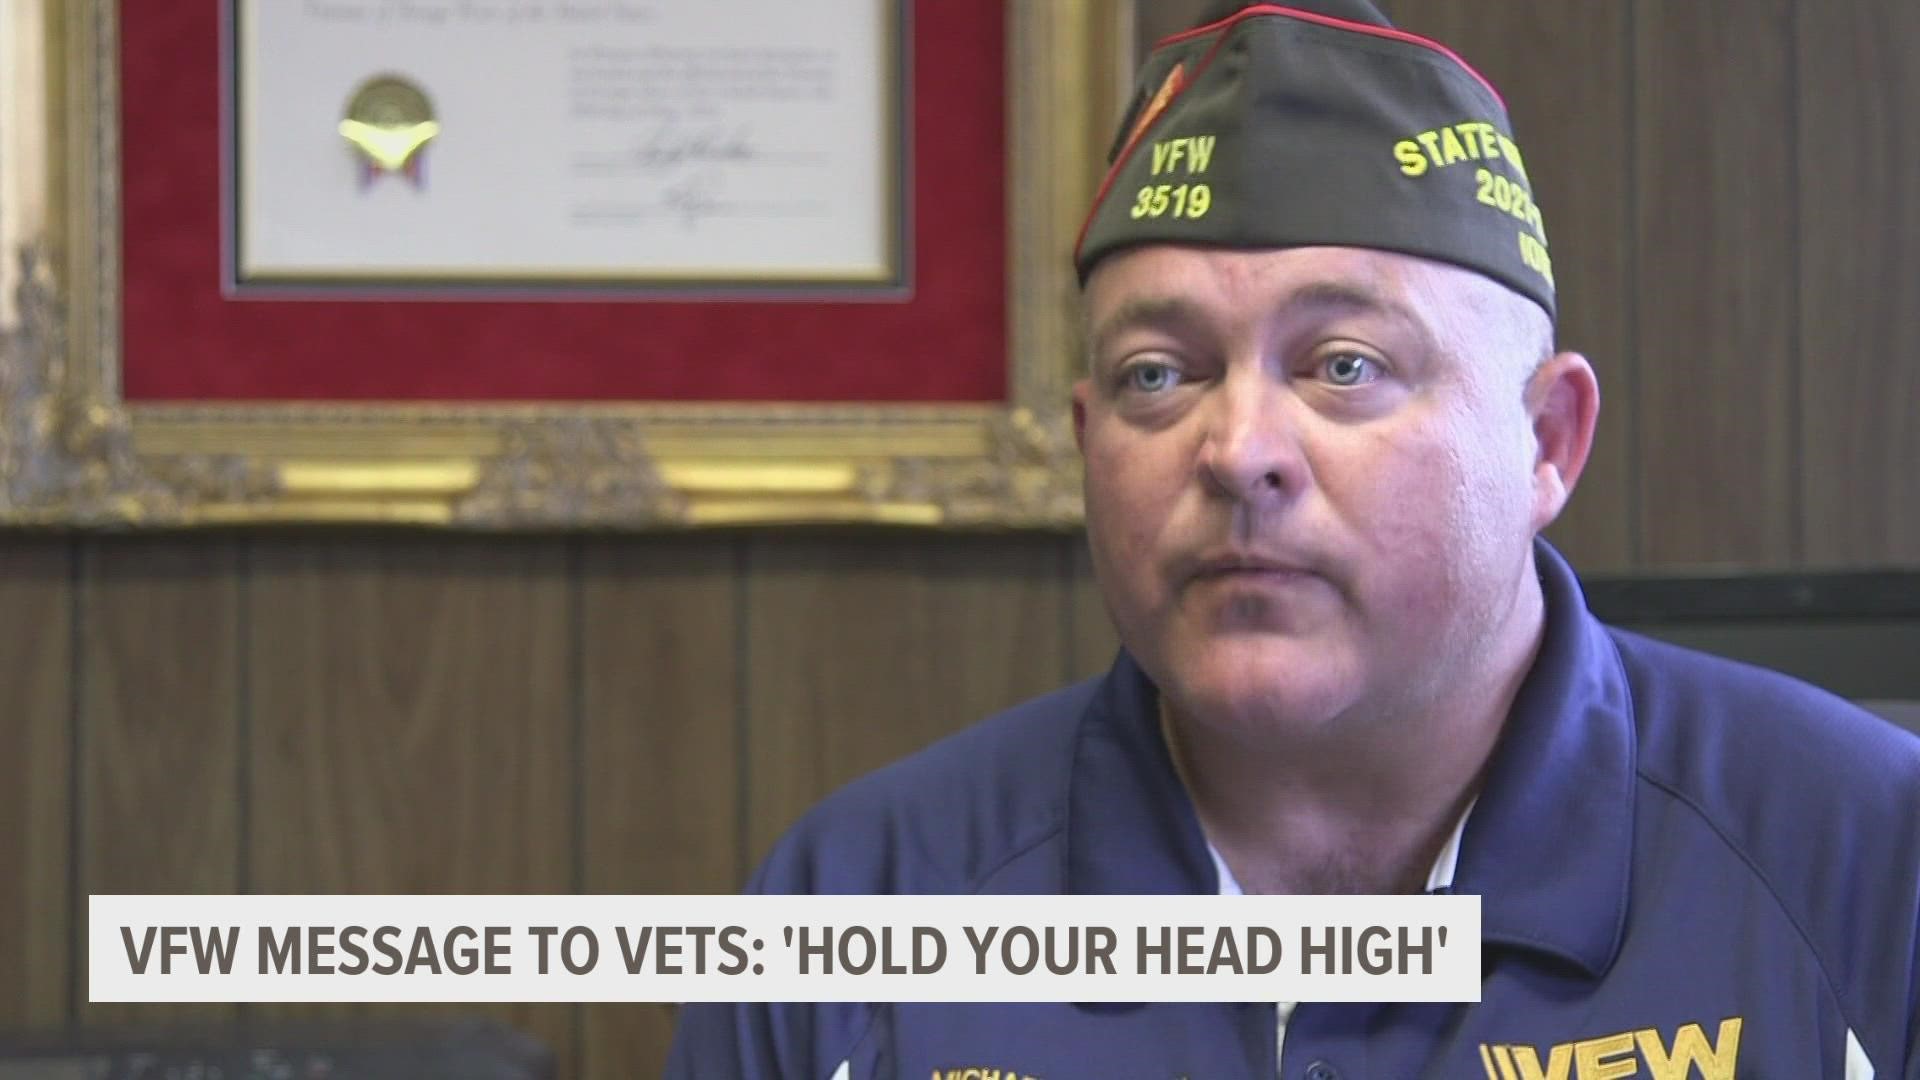 Commander Michael Braman urges veterans to reach out to their local VFW organization and contact their buddies from their time serving.